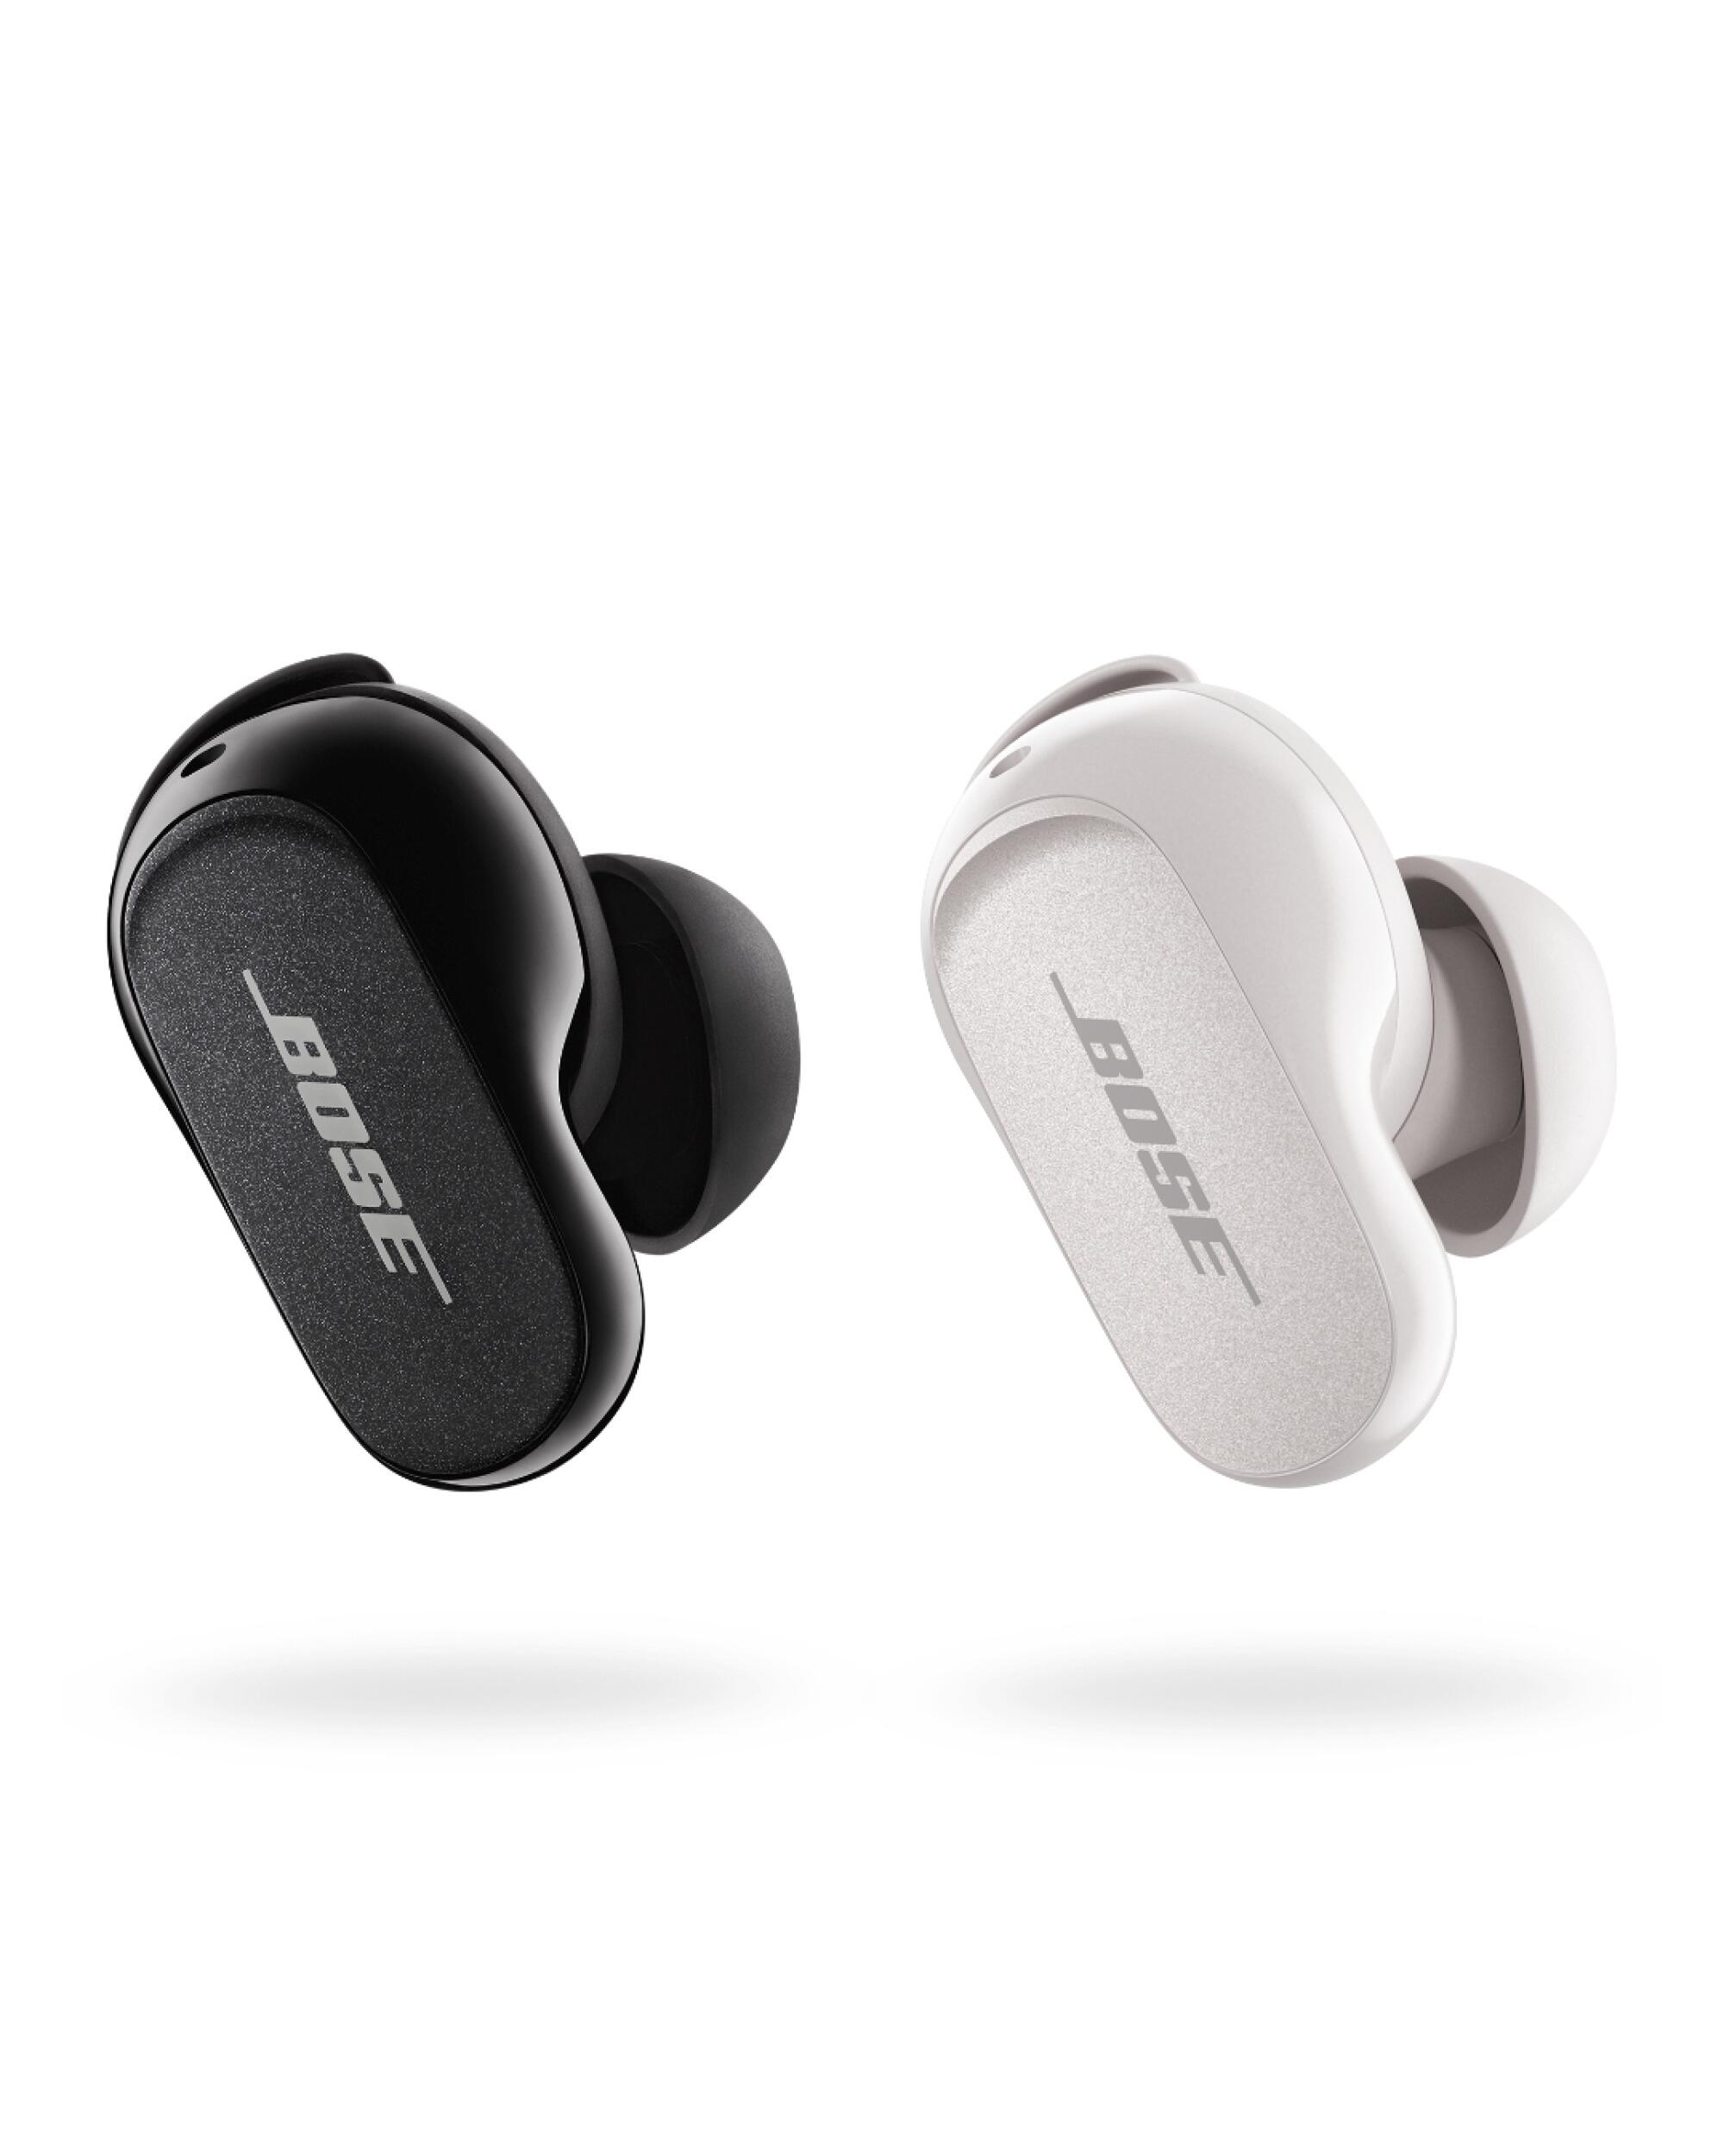 Noise-cancelling earbuds 